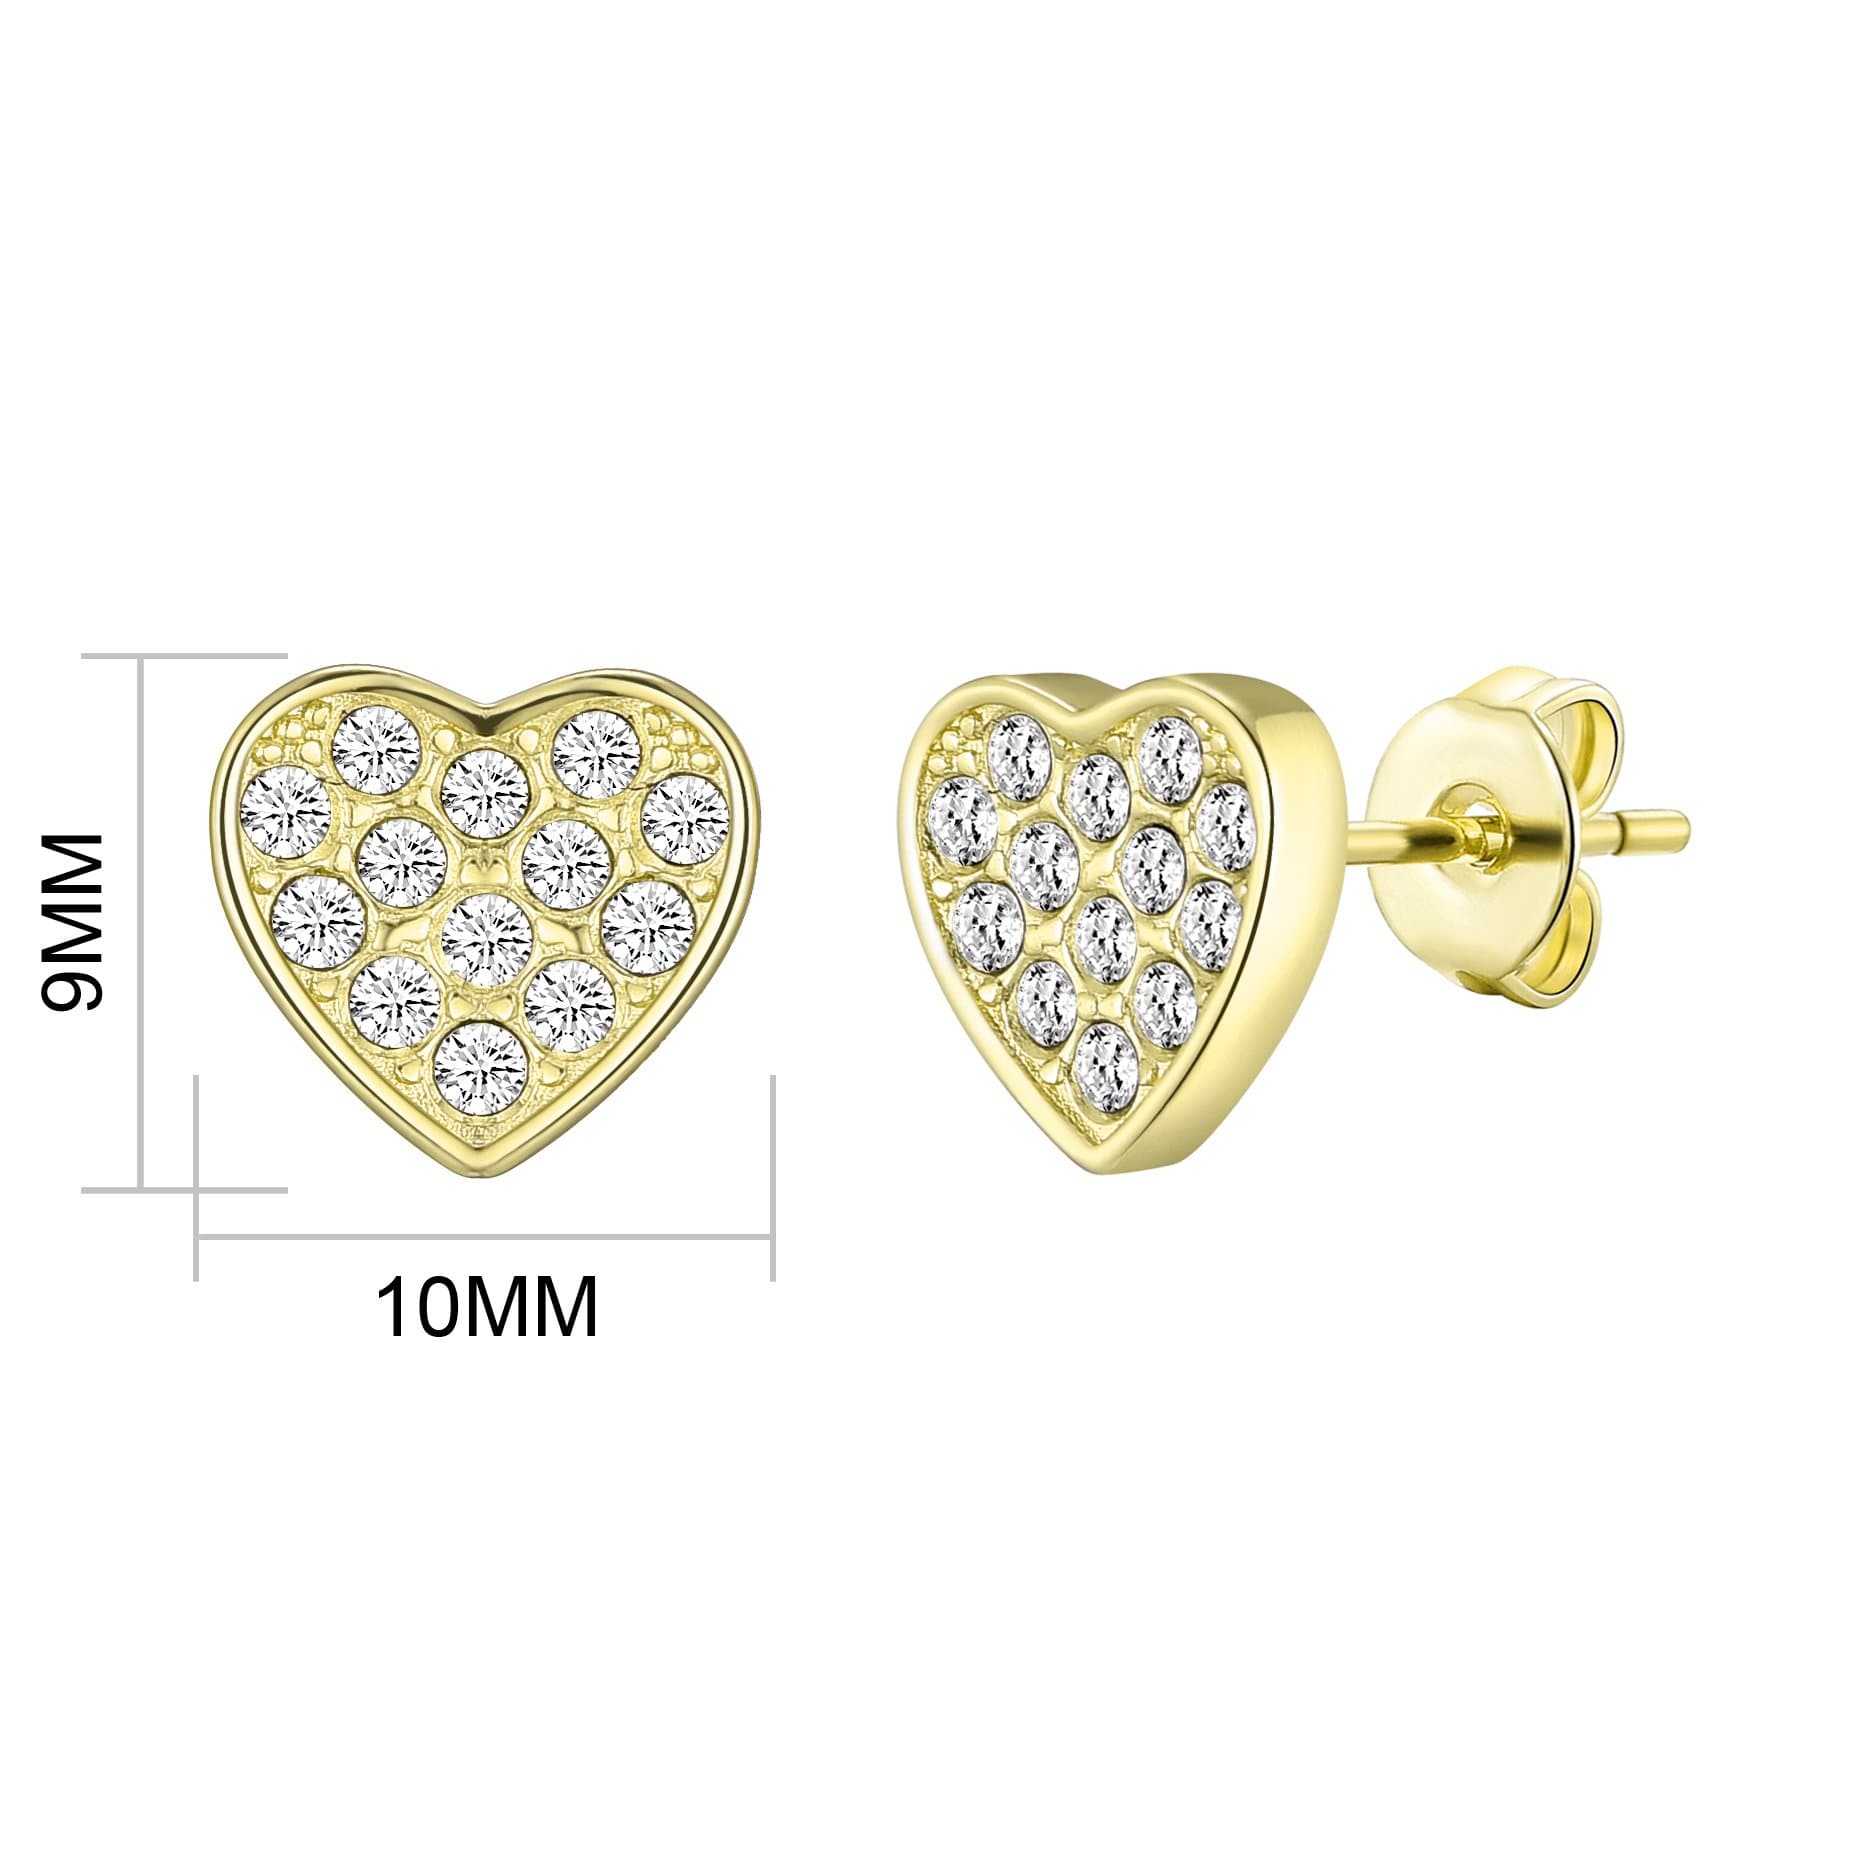 Gold Plated Pave Heart Earrings Created with Zircondia® Crystals